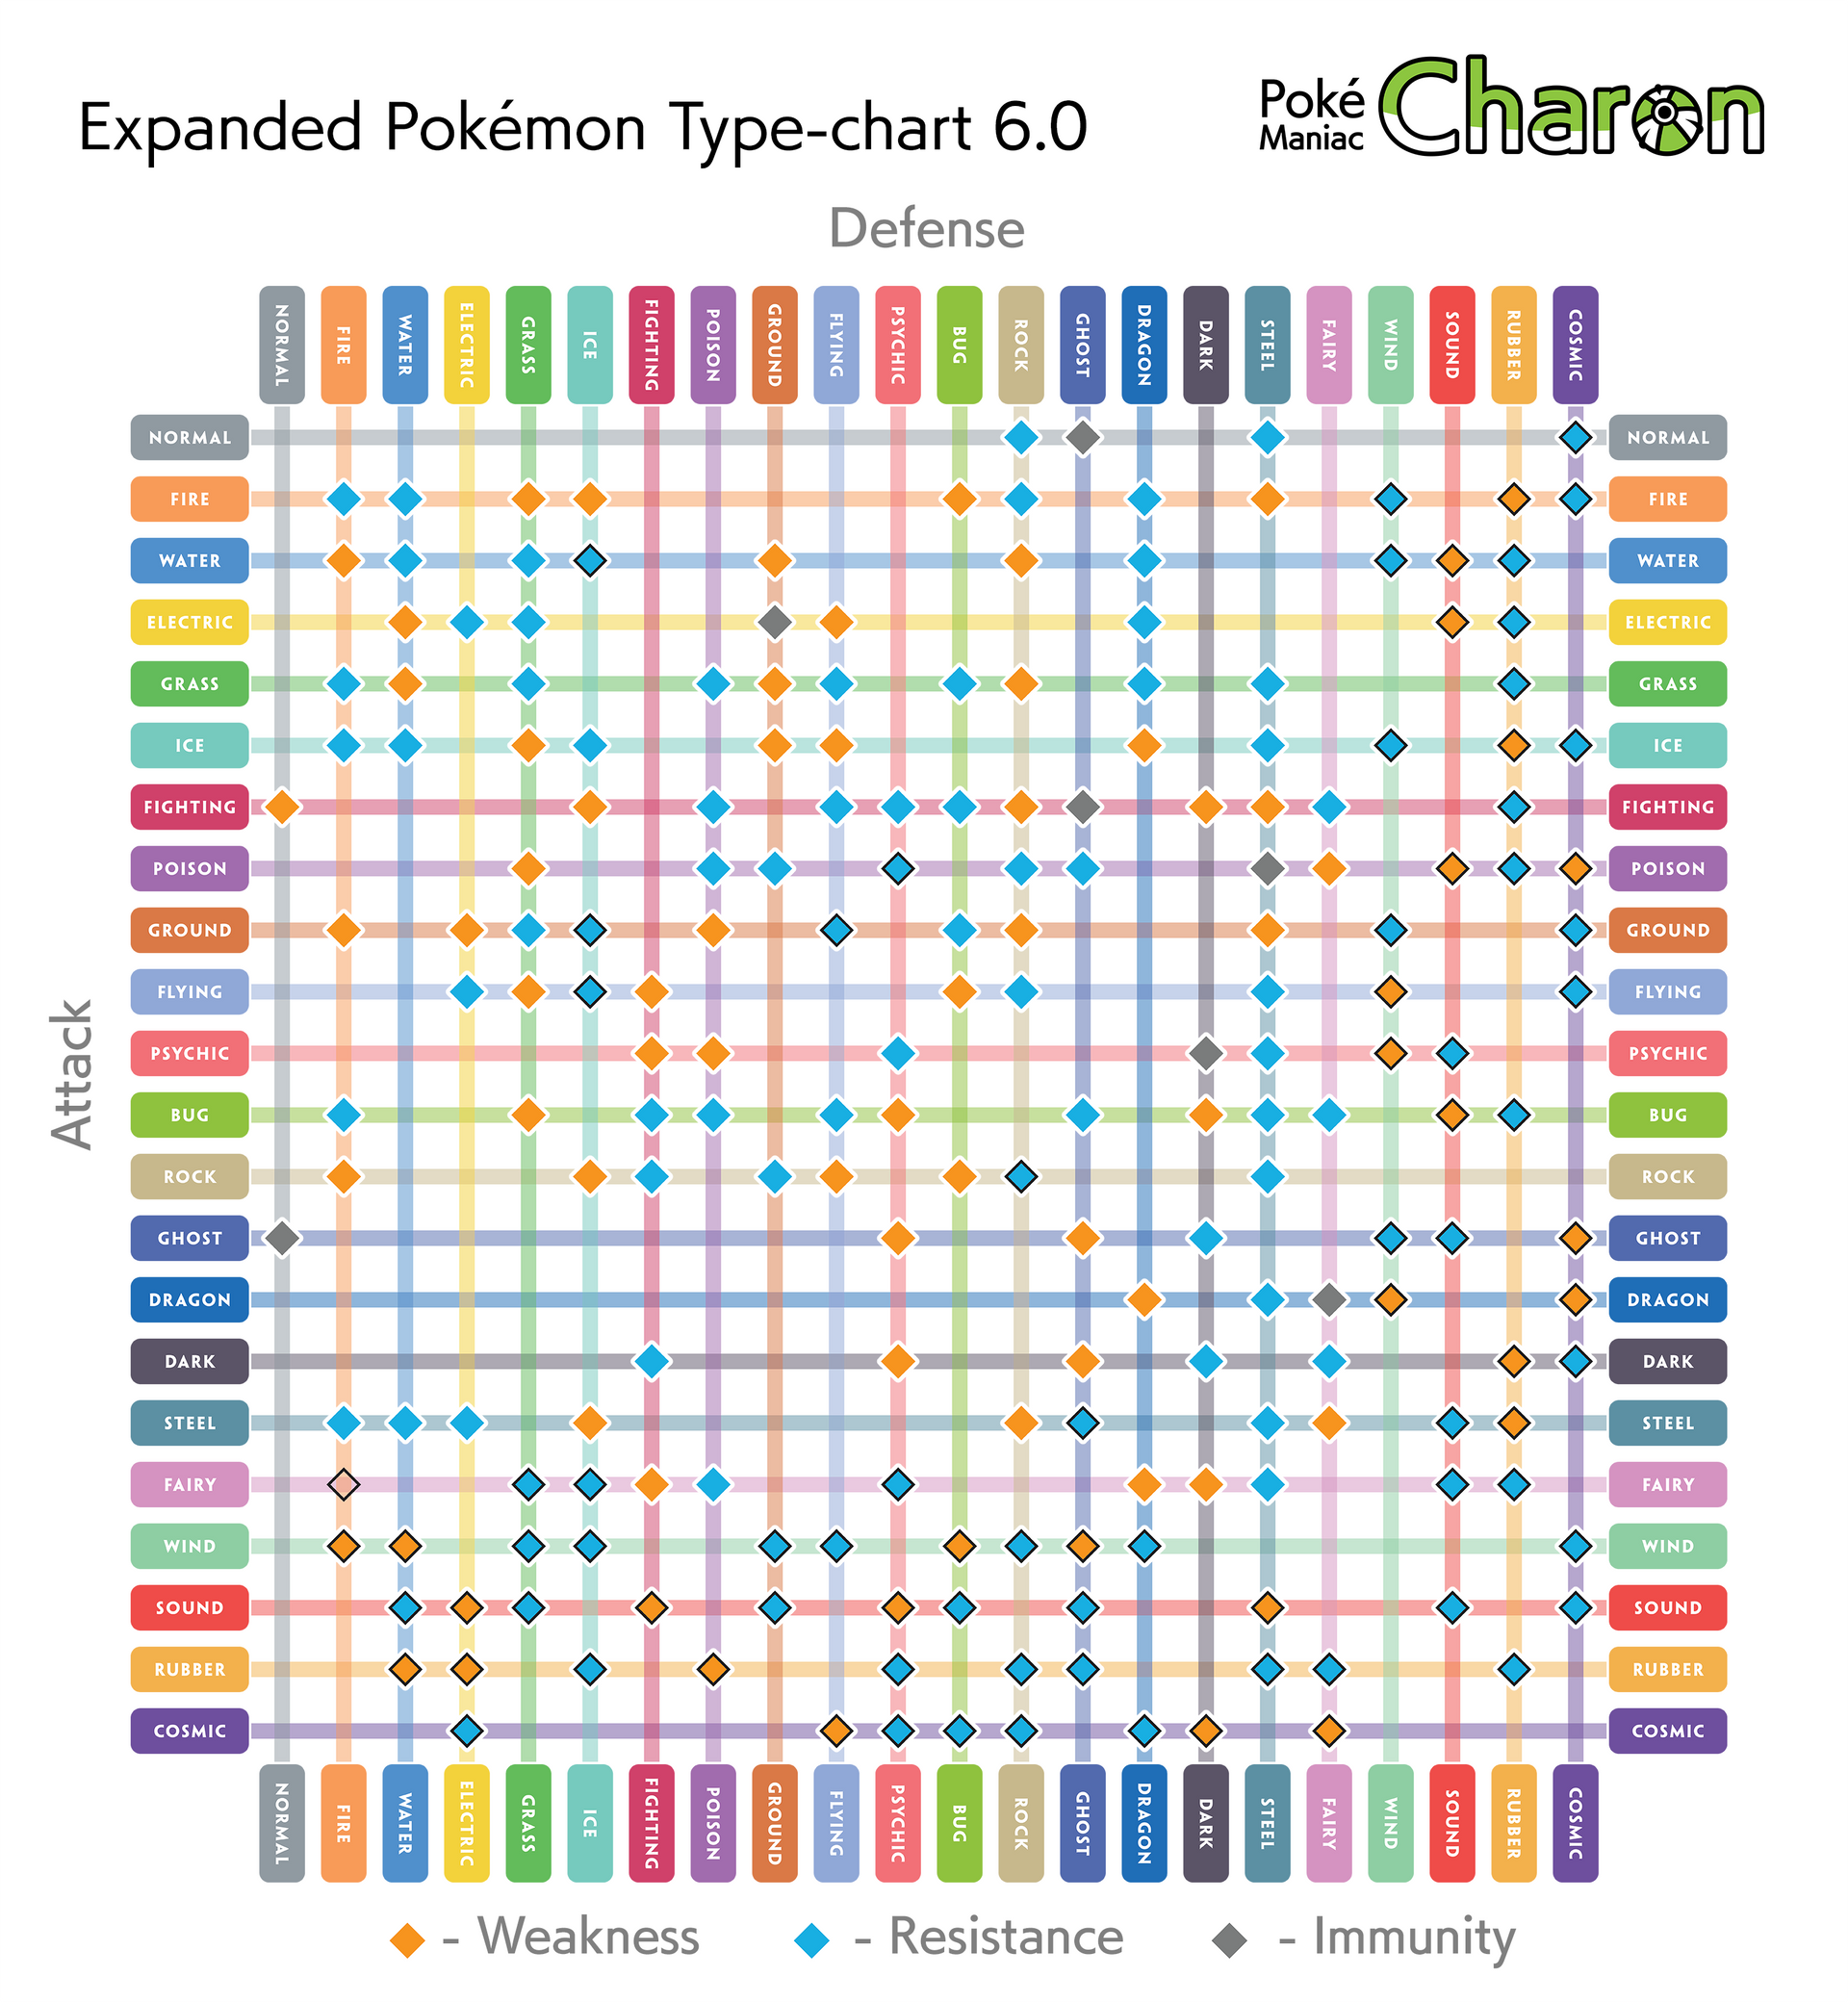 Expanded Type Chart 6.0 by AdeptCharon on DeviantArt